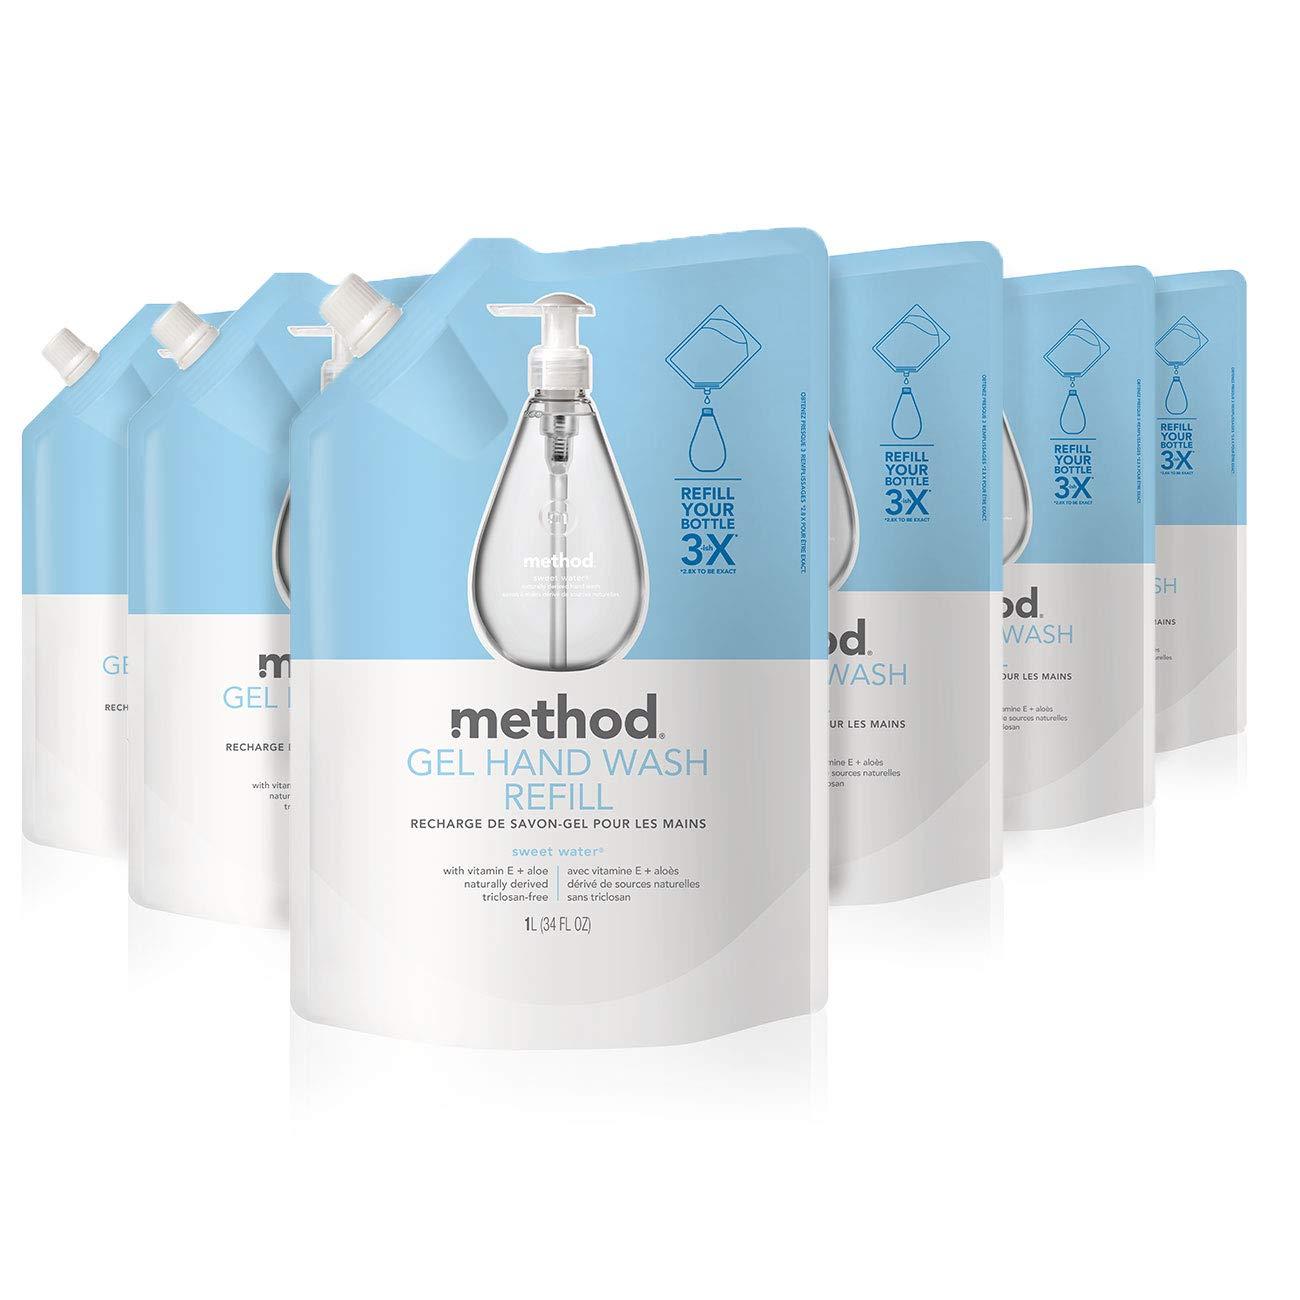 6 Method Gel Hand Soap Refill Sweet Water for $21.12 Shipped